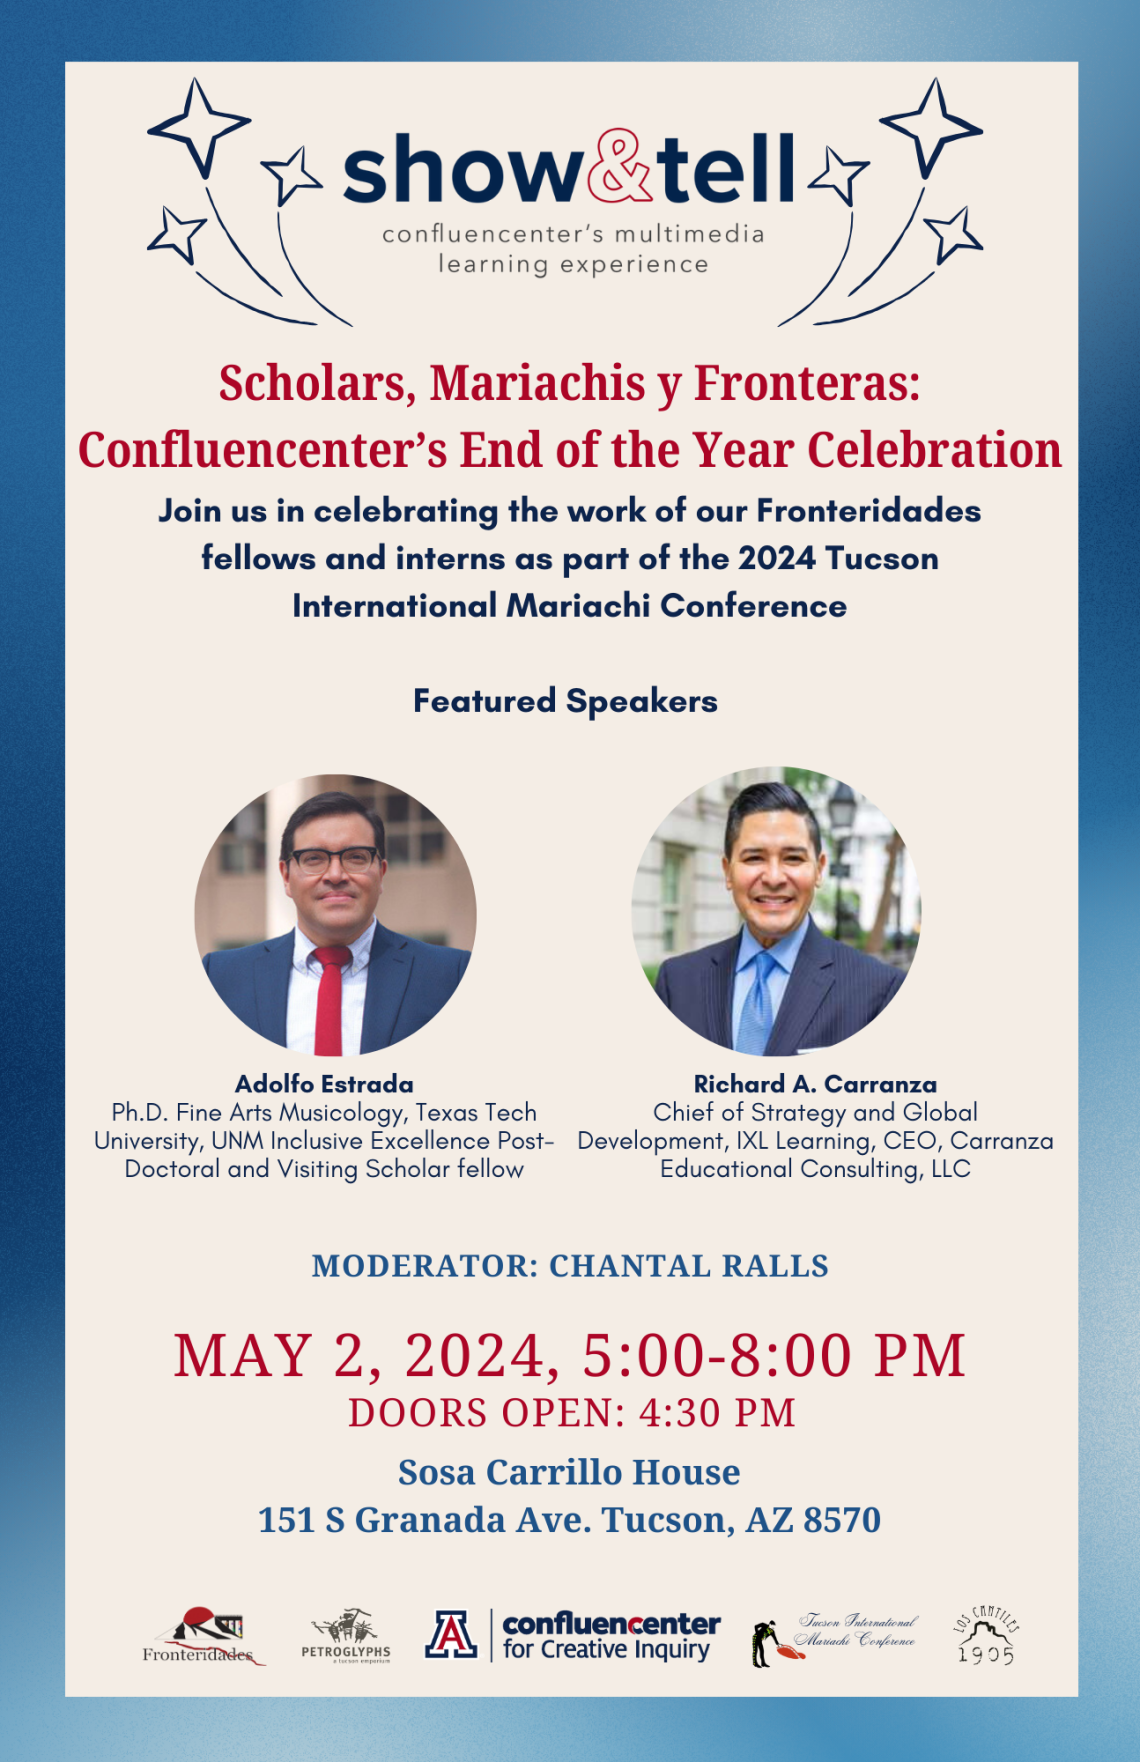 Scholars, Mariachis y Fronteras: Confluencenter’s End of the Year Celebration